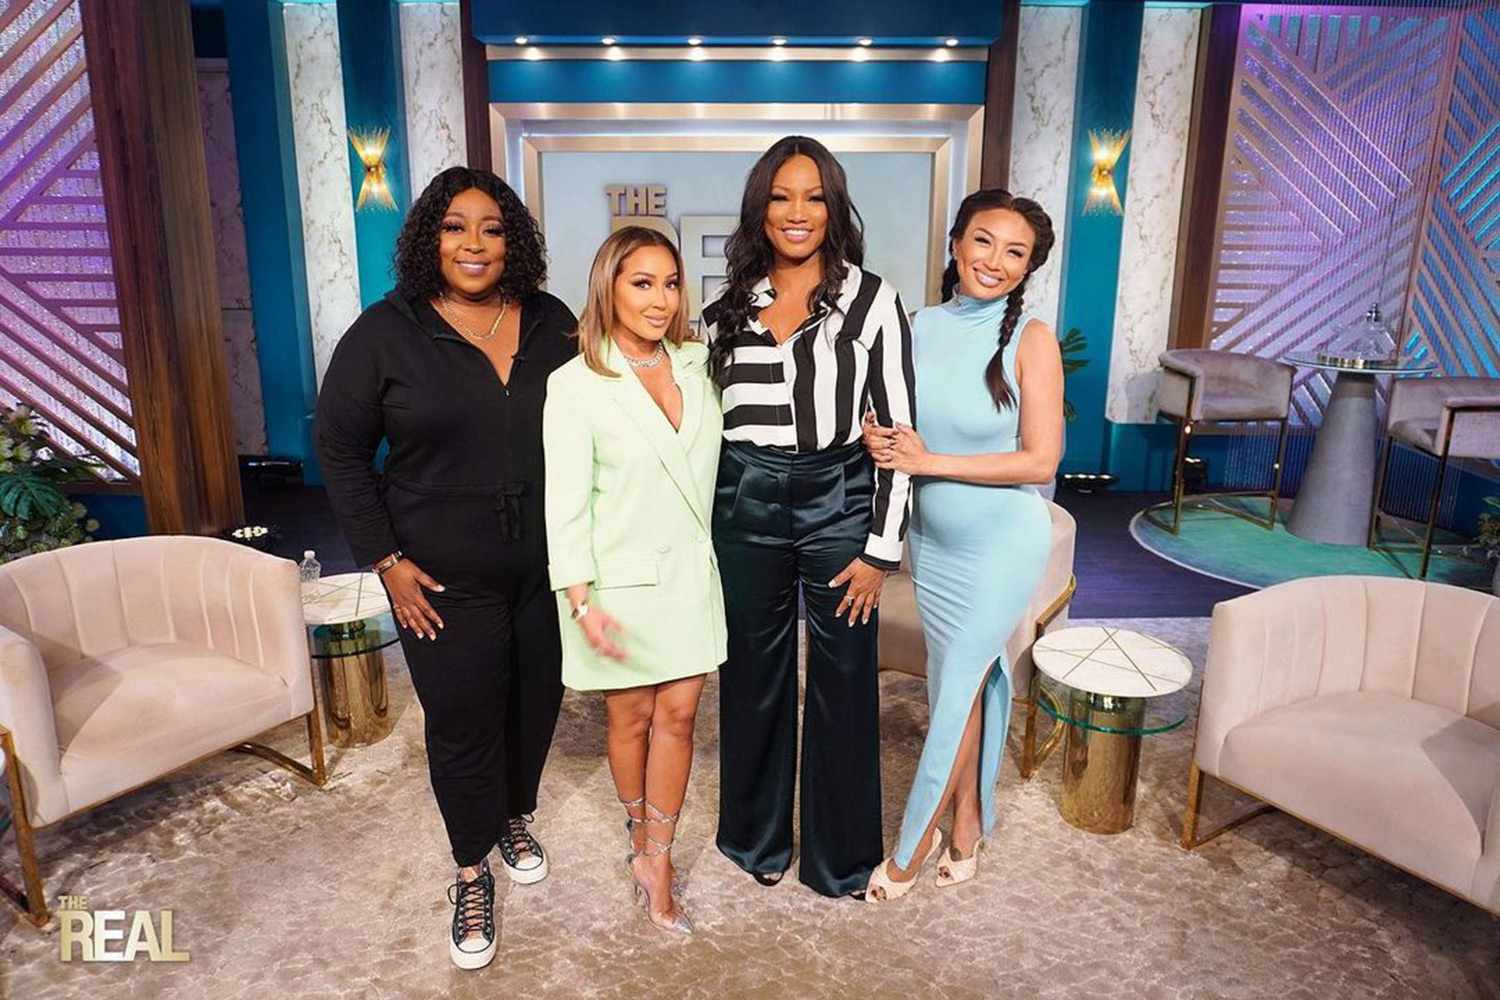 The REAL Show Has Been Cancelled. Adrienne Houghton, Jeannie Mai, Loni Love, Garcelle Beauvais Have Been Cancelled After Eight Years.